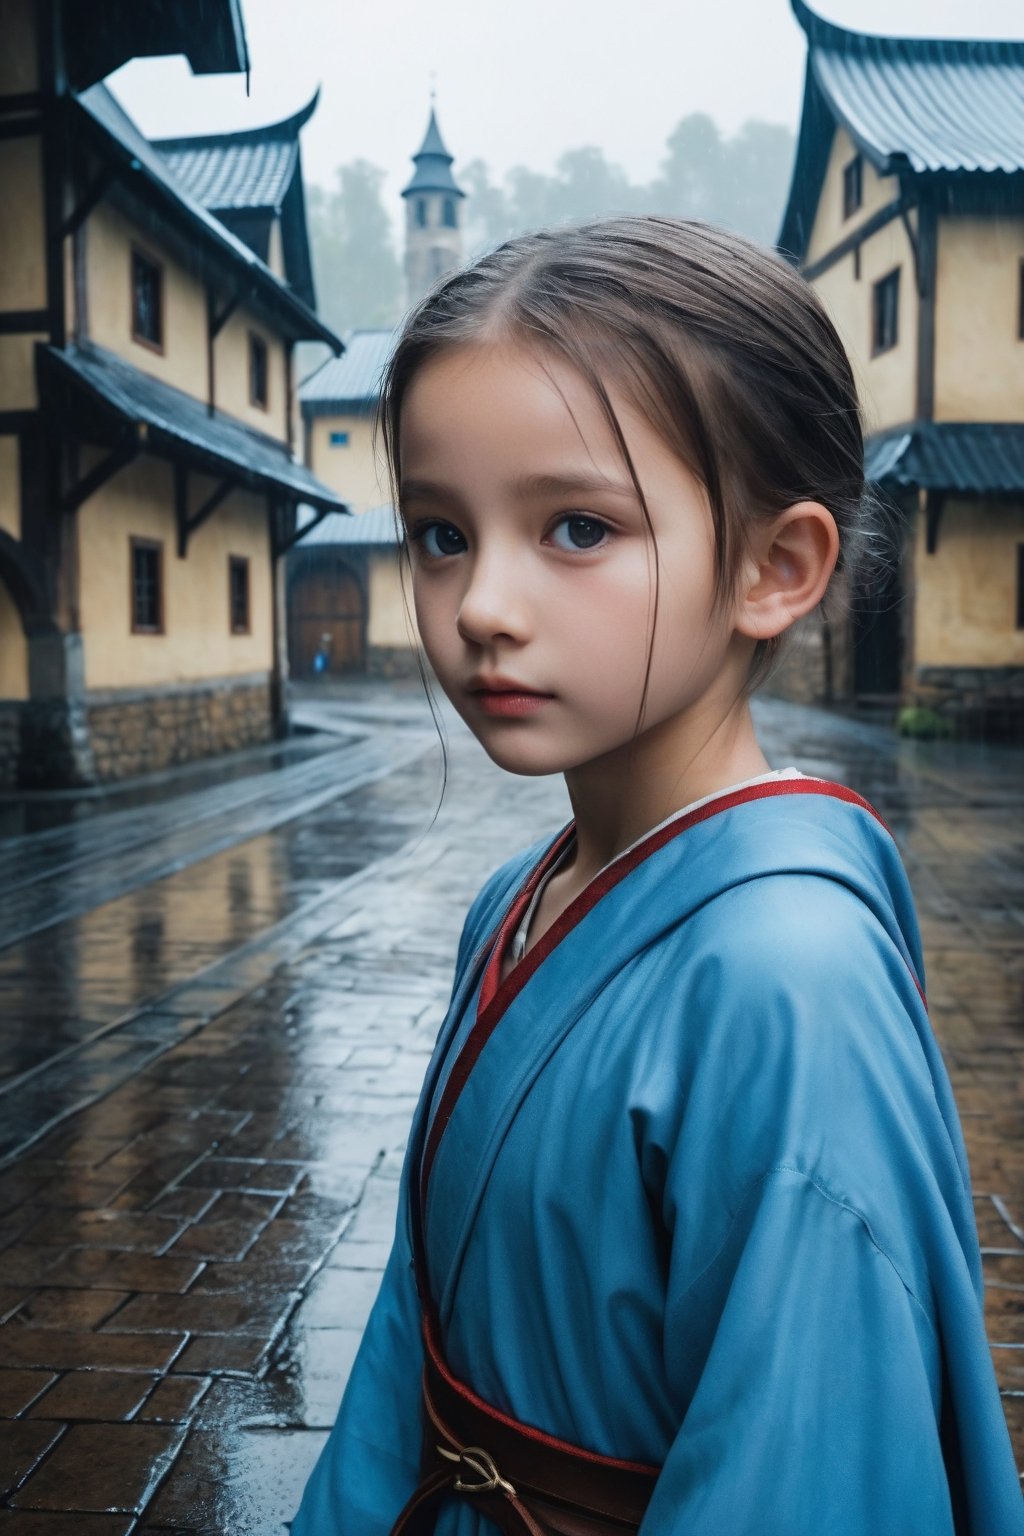 A blue-eyed baby girl left in front of the orphanage in the rainy weather in the medieval fantasy city is seen from afar